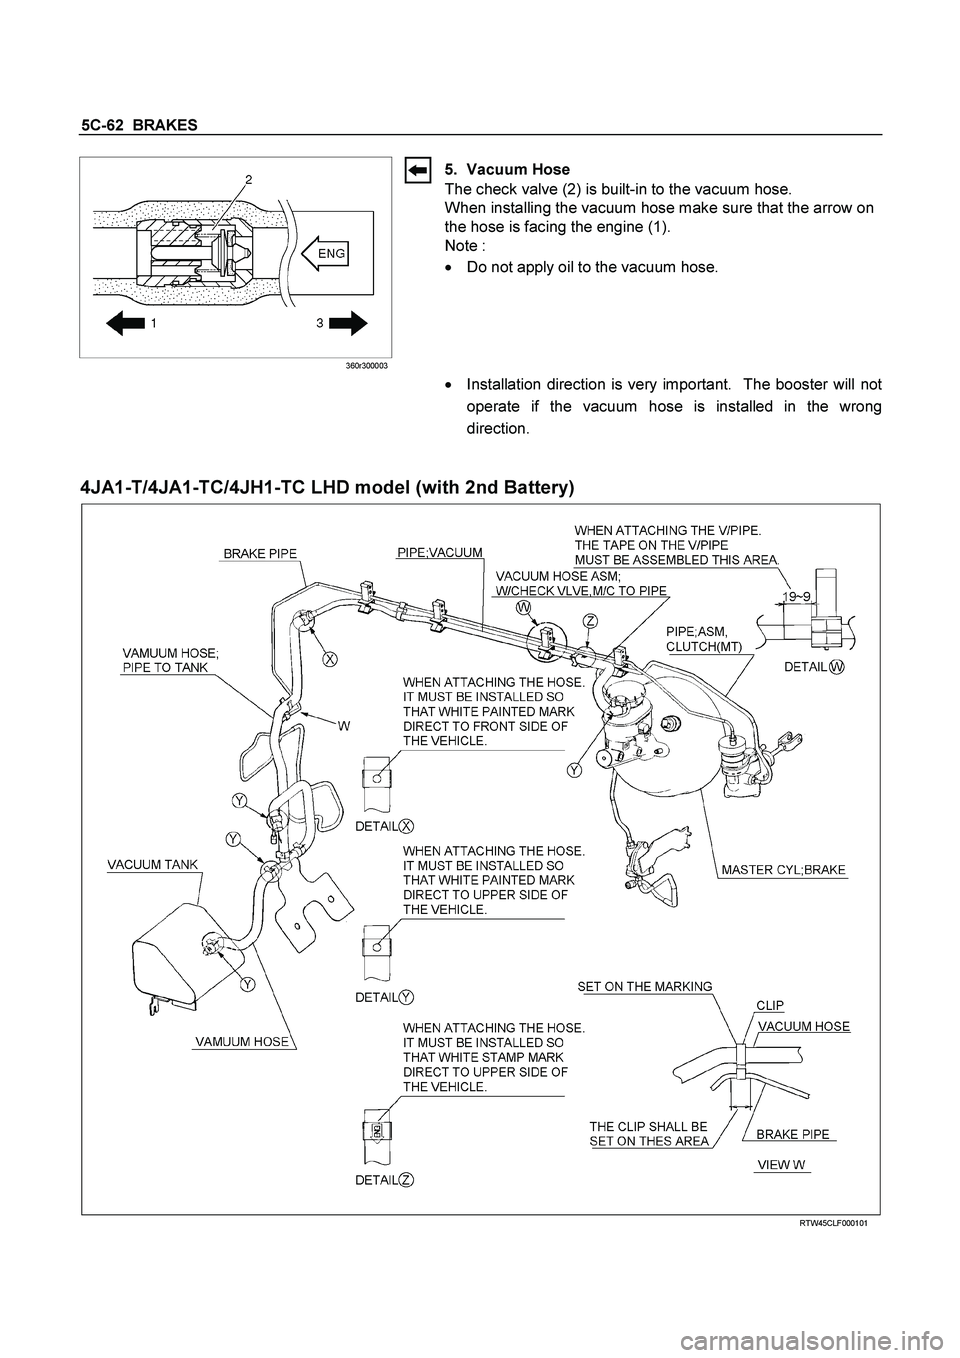 ISUZU TF SERIES 2004  Workshop Manual 5C-62  BRAKES 
 360r300003 
5. Vacuum Hose 
The check valve (2) is built-in to the vacuum hose. 
When installing the vacuum hose make sure that the arrow on 
the hose is facing the engine (1). 
Note :